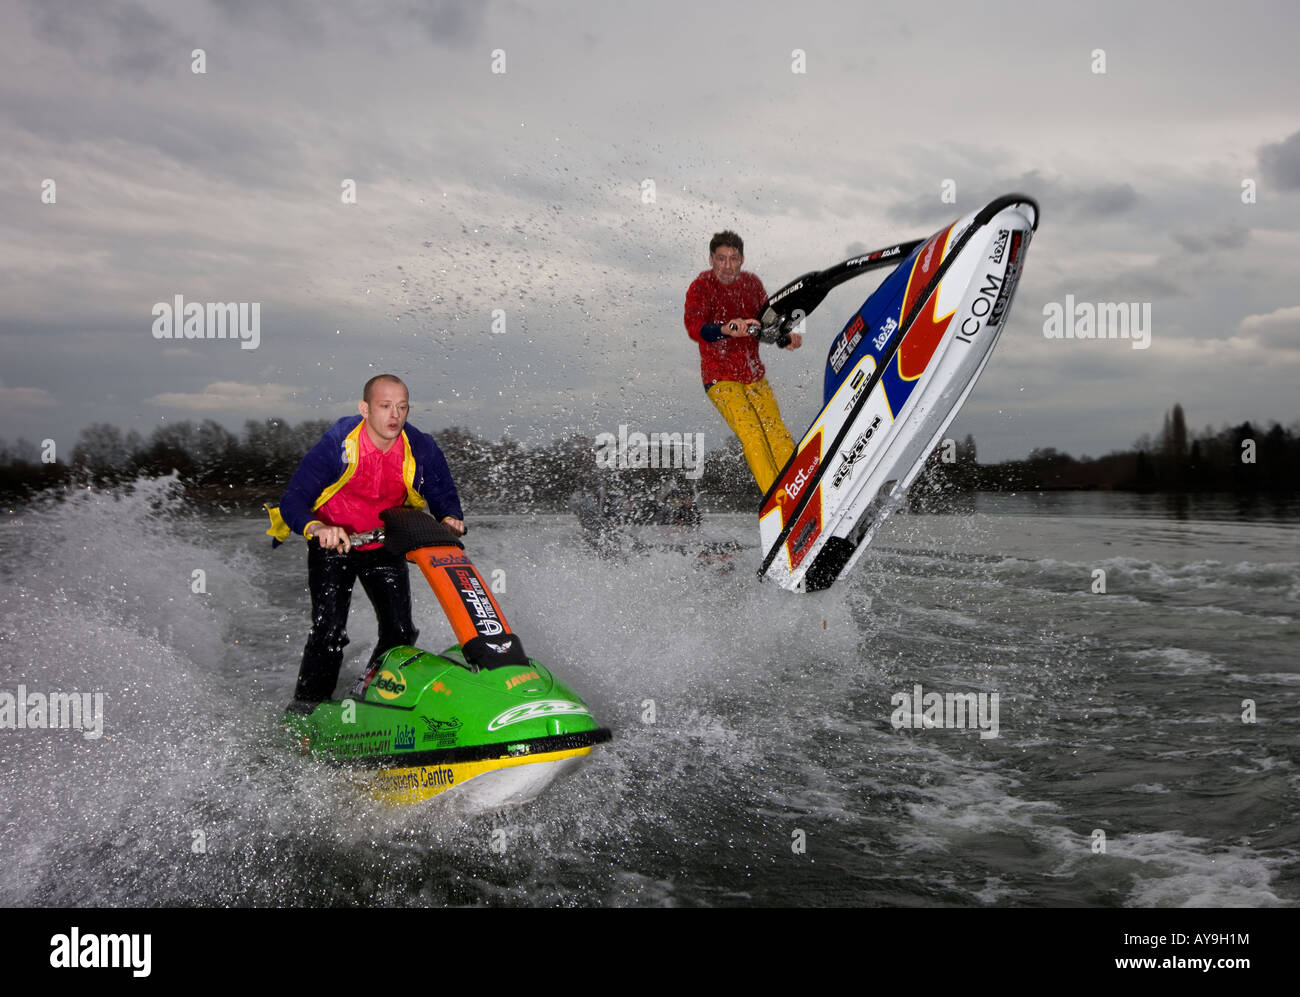 Two men racing jet skis, speed and rivalry Stock Photo